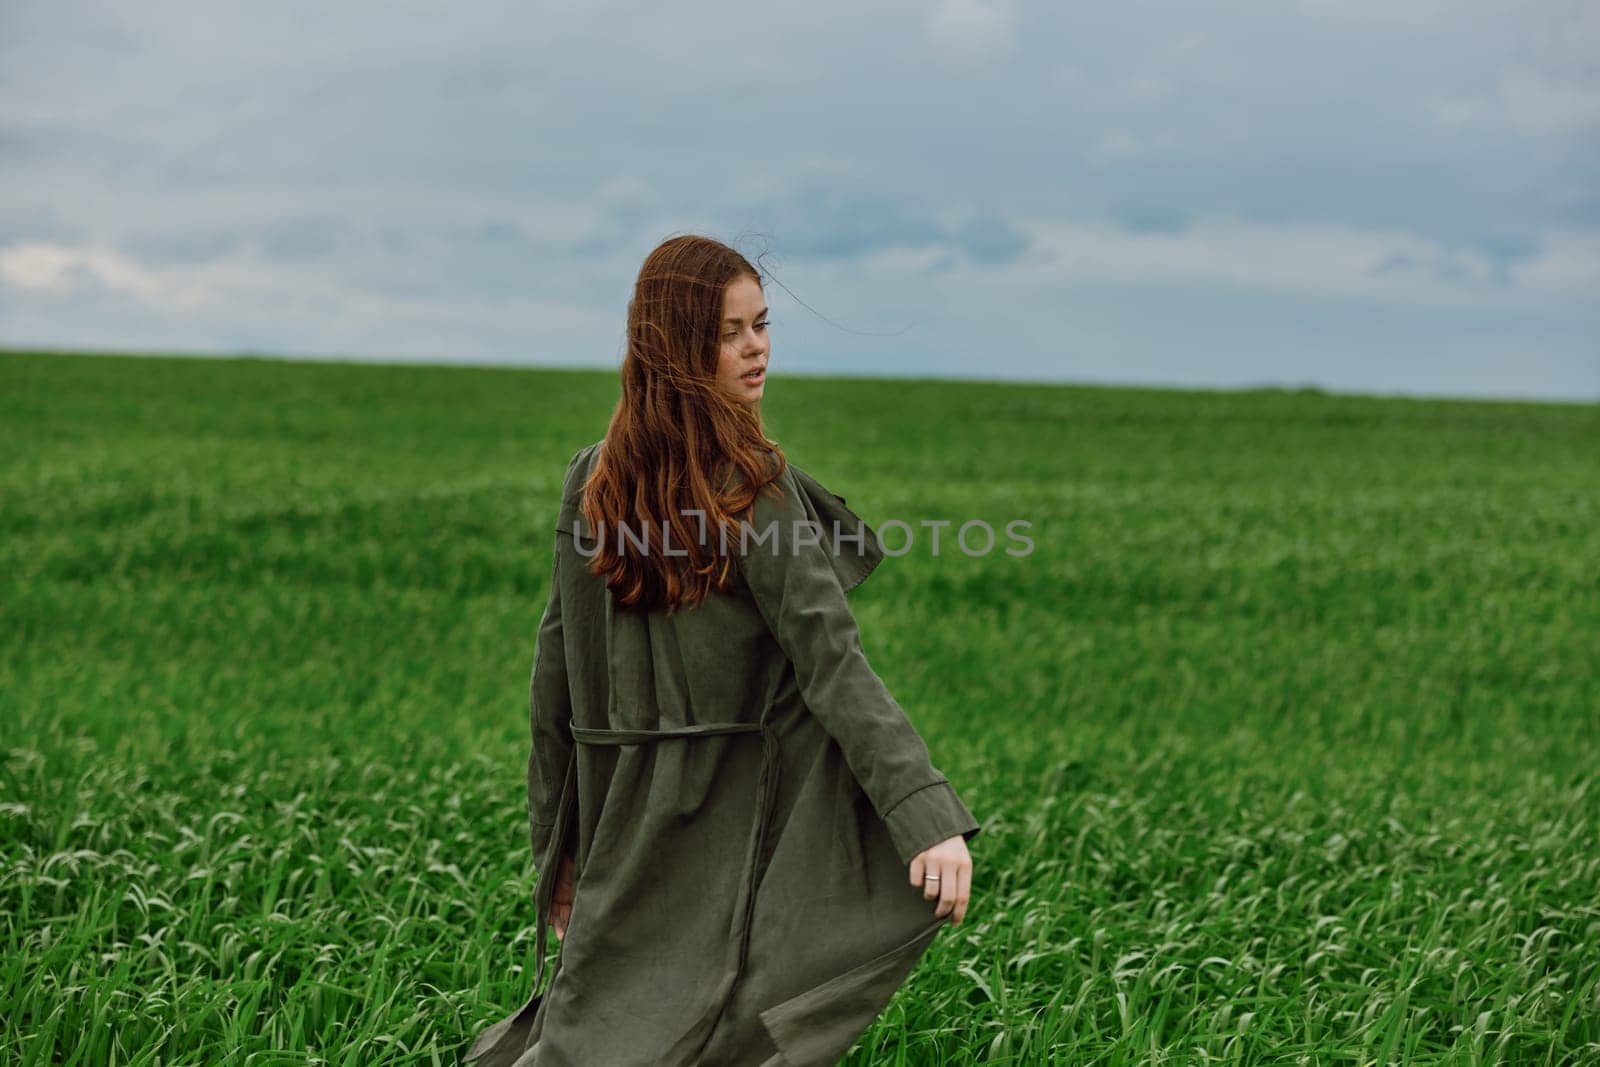 a woman in a dark coat stands in a green field in the wind close to the camera. Strong wind, cloudy weather. High quality photo